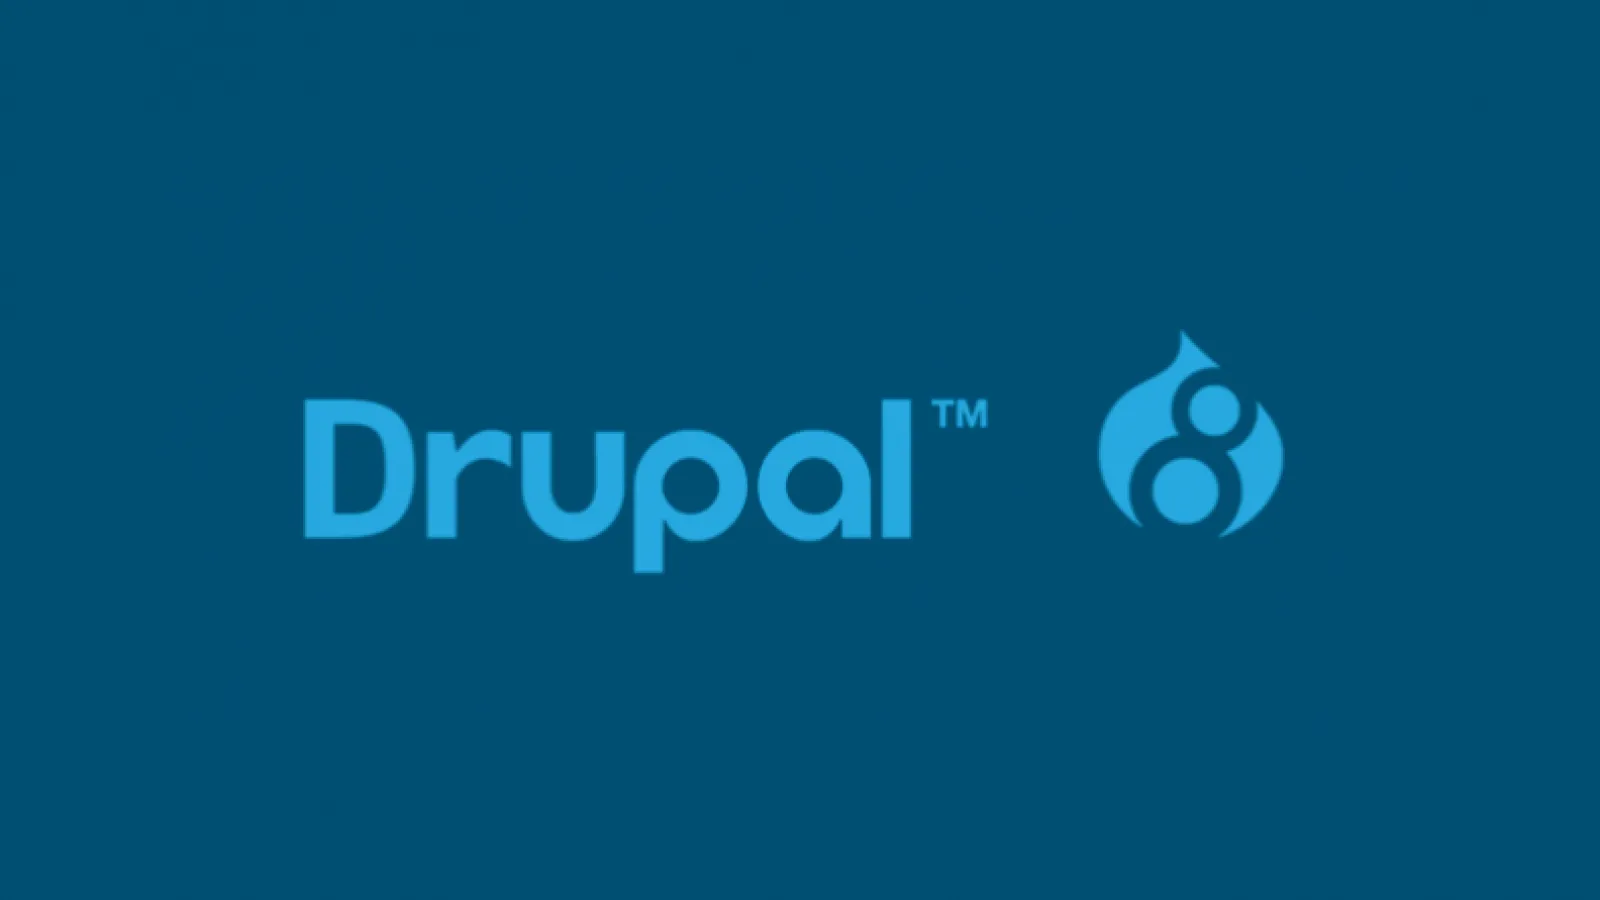 Drupal in a day training